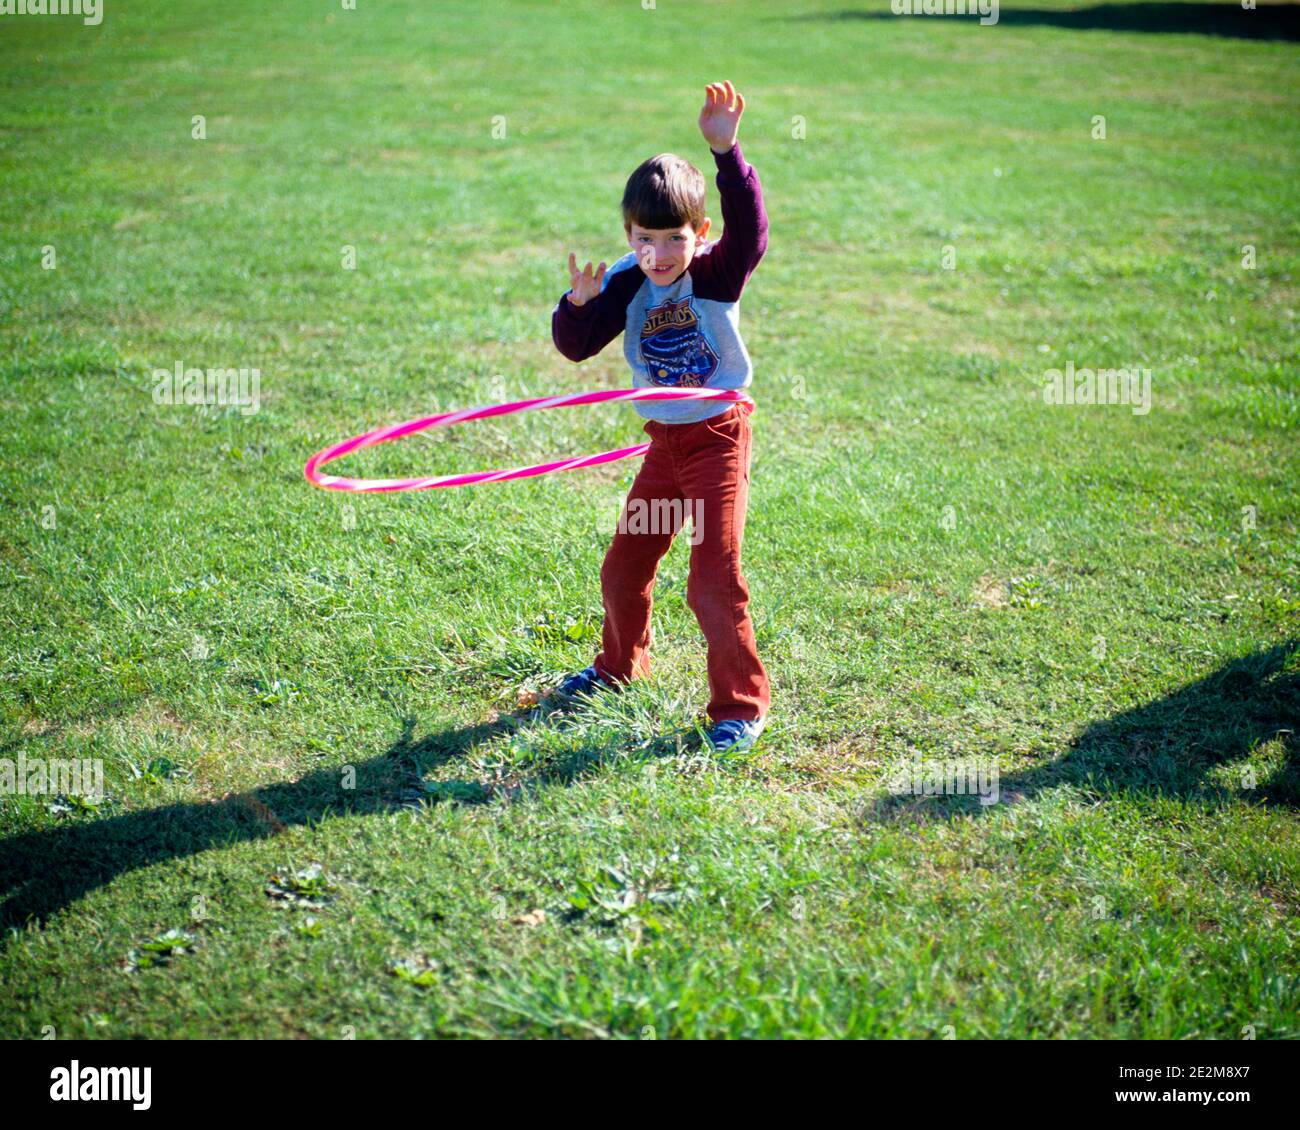 1980s BOY PLAYING WITH HULA HOOP - cj001197 CAM001 HARS SKILL ACTIVITY PHYSICAL HIGH ANGLE ADVENTURE STRENGTH RECREATION CAM001 PRIDE FAD FLEXIBILITY MUSCLES HULA HOOP JUVENILES TWIRL CAUCASIAN ETHNICITY OLD FASHIONED SPIN TWIRLING Stock Photo